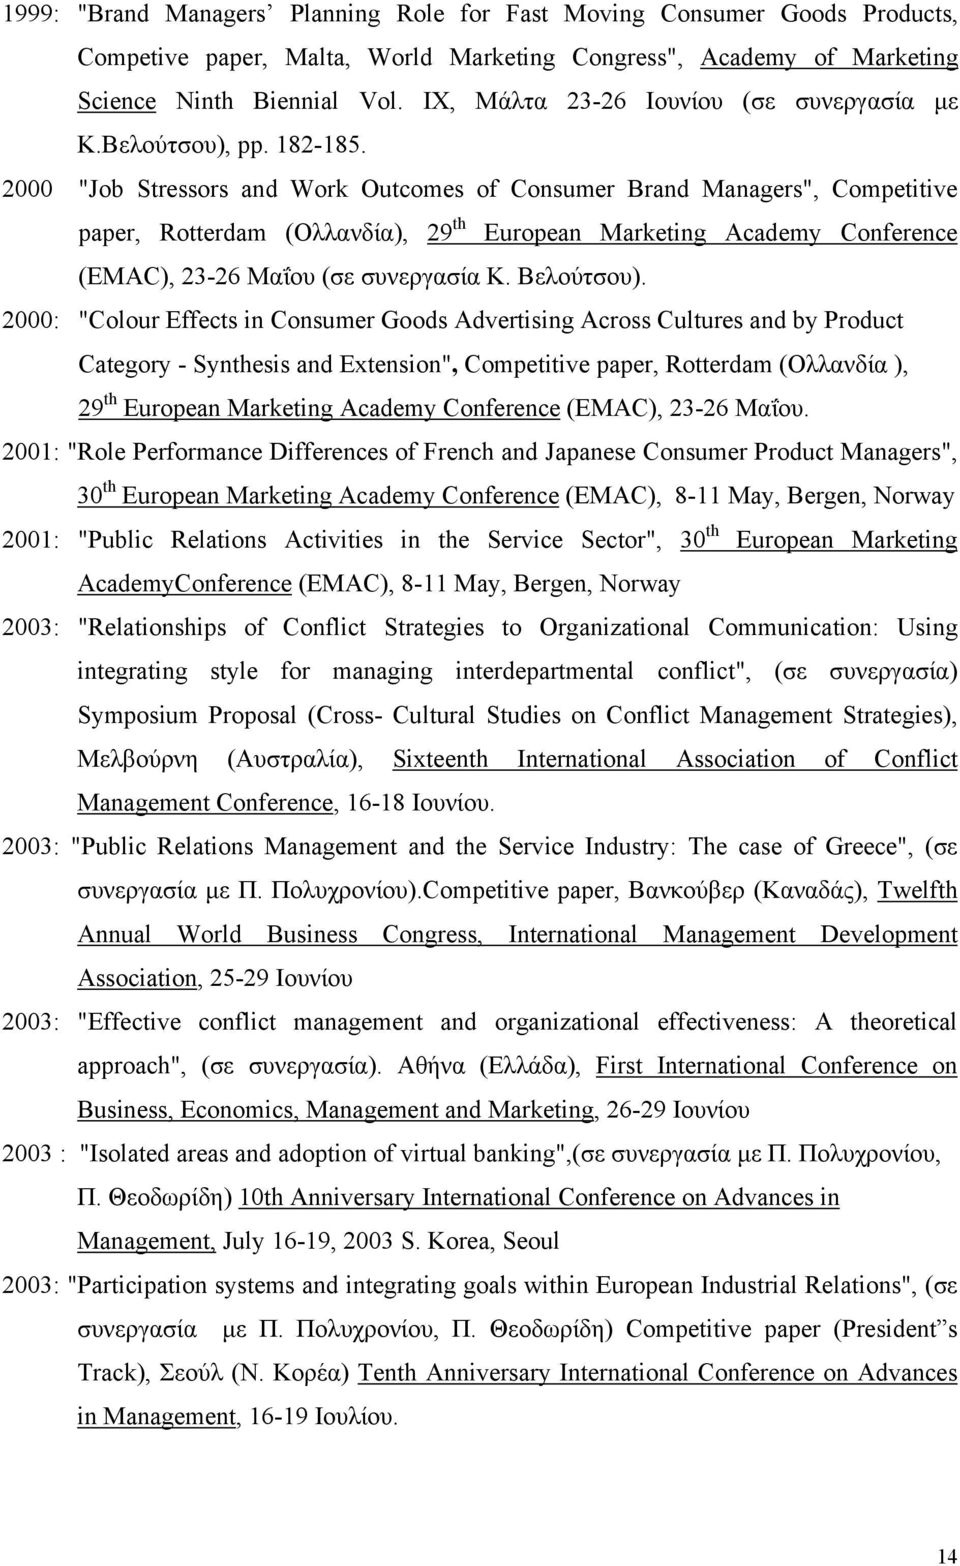 2000 "Job Stressors and Work Outcomes of Consumer Brand Managers", Competitive paper, Rotterdam (Ολλανδία), 29 th European Marketing Academy Conference (EMAC), 23-26 Μαΐου (σε συνεργασία Κ.